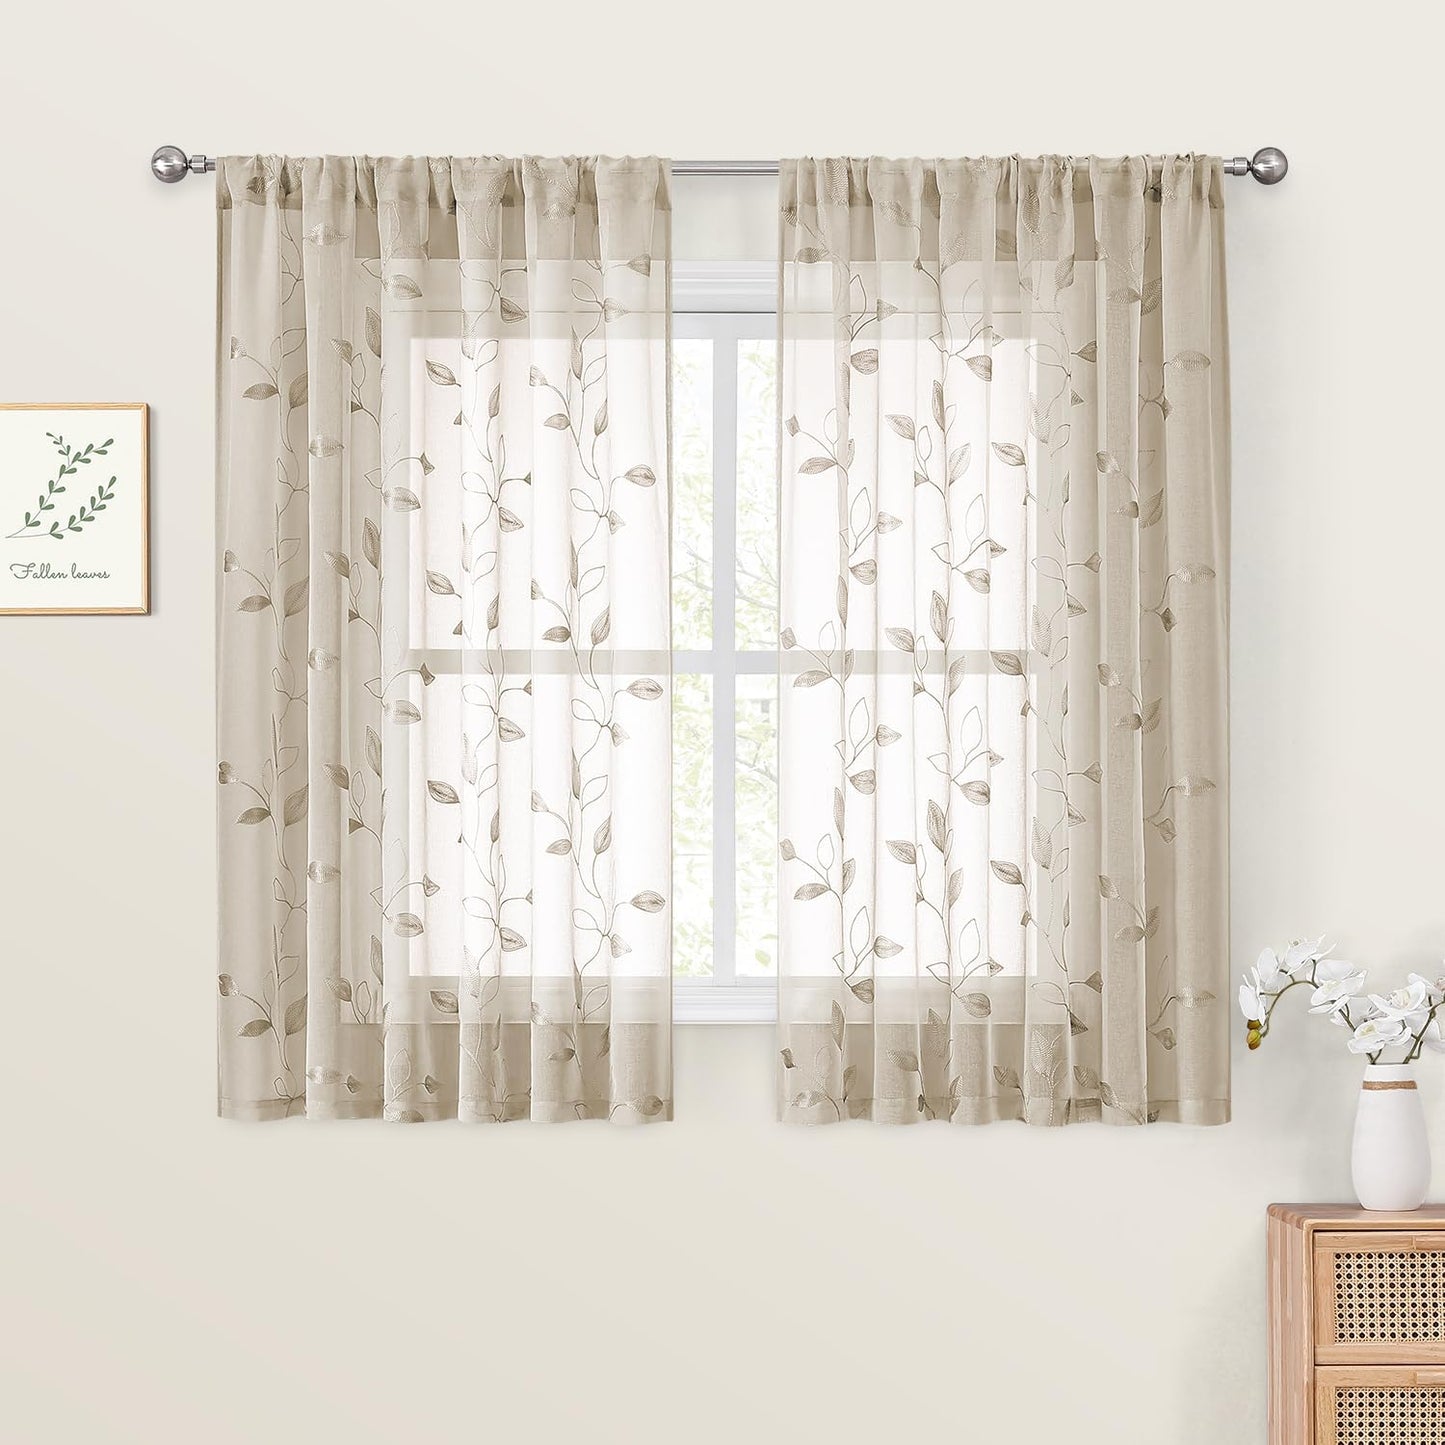 HOMEIDEAS Sage Green Sheer Curtains 52 X 63 Inches Length 2 Panels Embroidered Leaf Pattern Pocket Faux Linen Floral Semi Sheer Voile Window Curtains/Drapes for Bedroom Living Room  HOMEIDEAS 2-Taupe/Beige W52" X L54" 